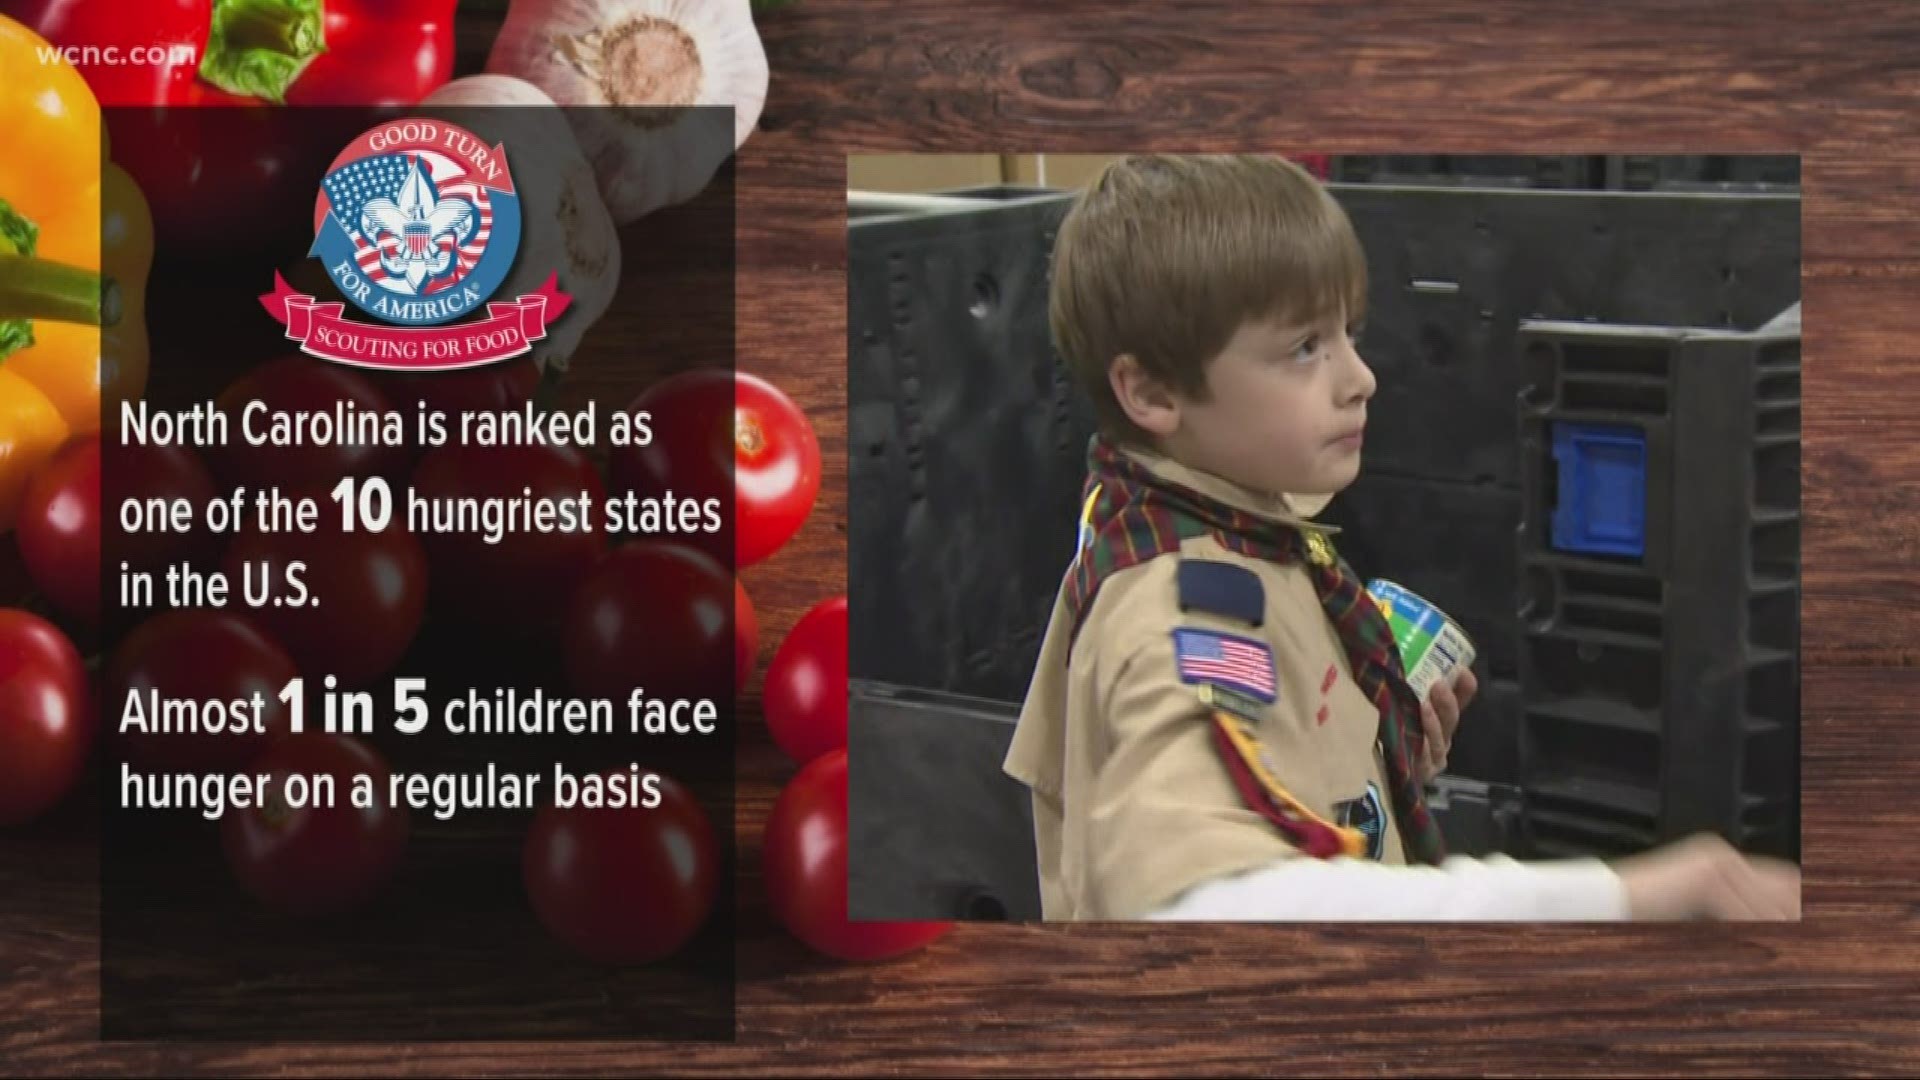 Local boy scouts are hosting a food drive to help eradicate hunger in our community.